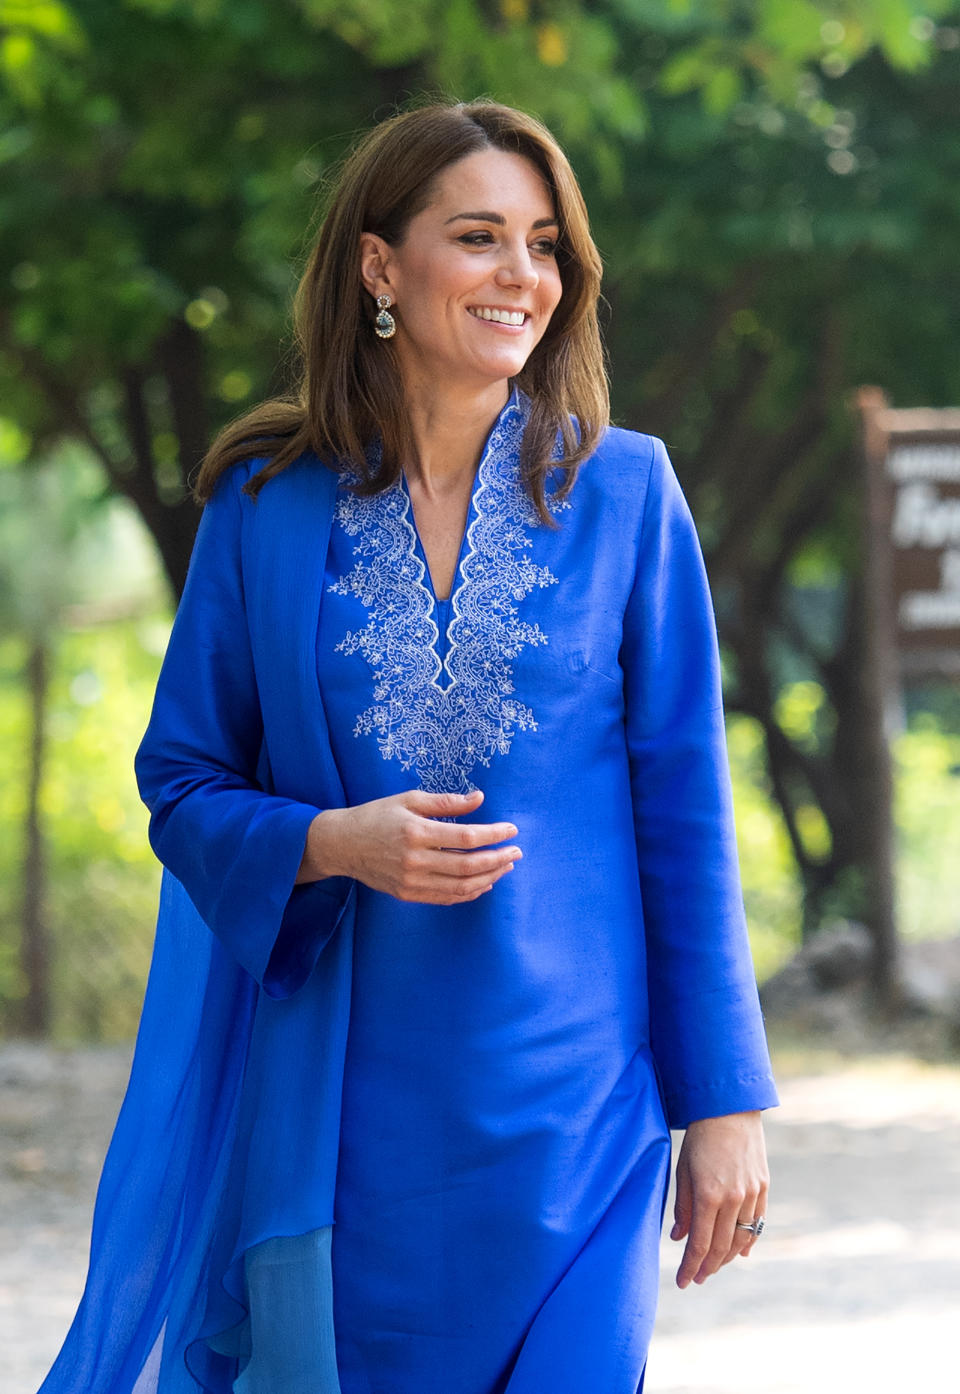 ISLAMABAD, PAKISTAN - OCTOBER 15:  (UK OUT FOR 28 DAYS) Catherine, Duchess of Cambridge visitS the Margalla Hills National Park, which sit in the foothills of the Himalayas, to join children from three local schools taking part in a number of activities which highlight Pakistan’s work to meet several of the Sustainable Development Goals on October 15, 2019 in Islamabad, Pakistan.  (Photo by Pool/Samir Hussein/WireImage)